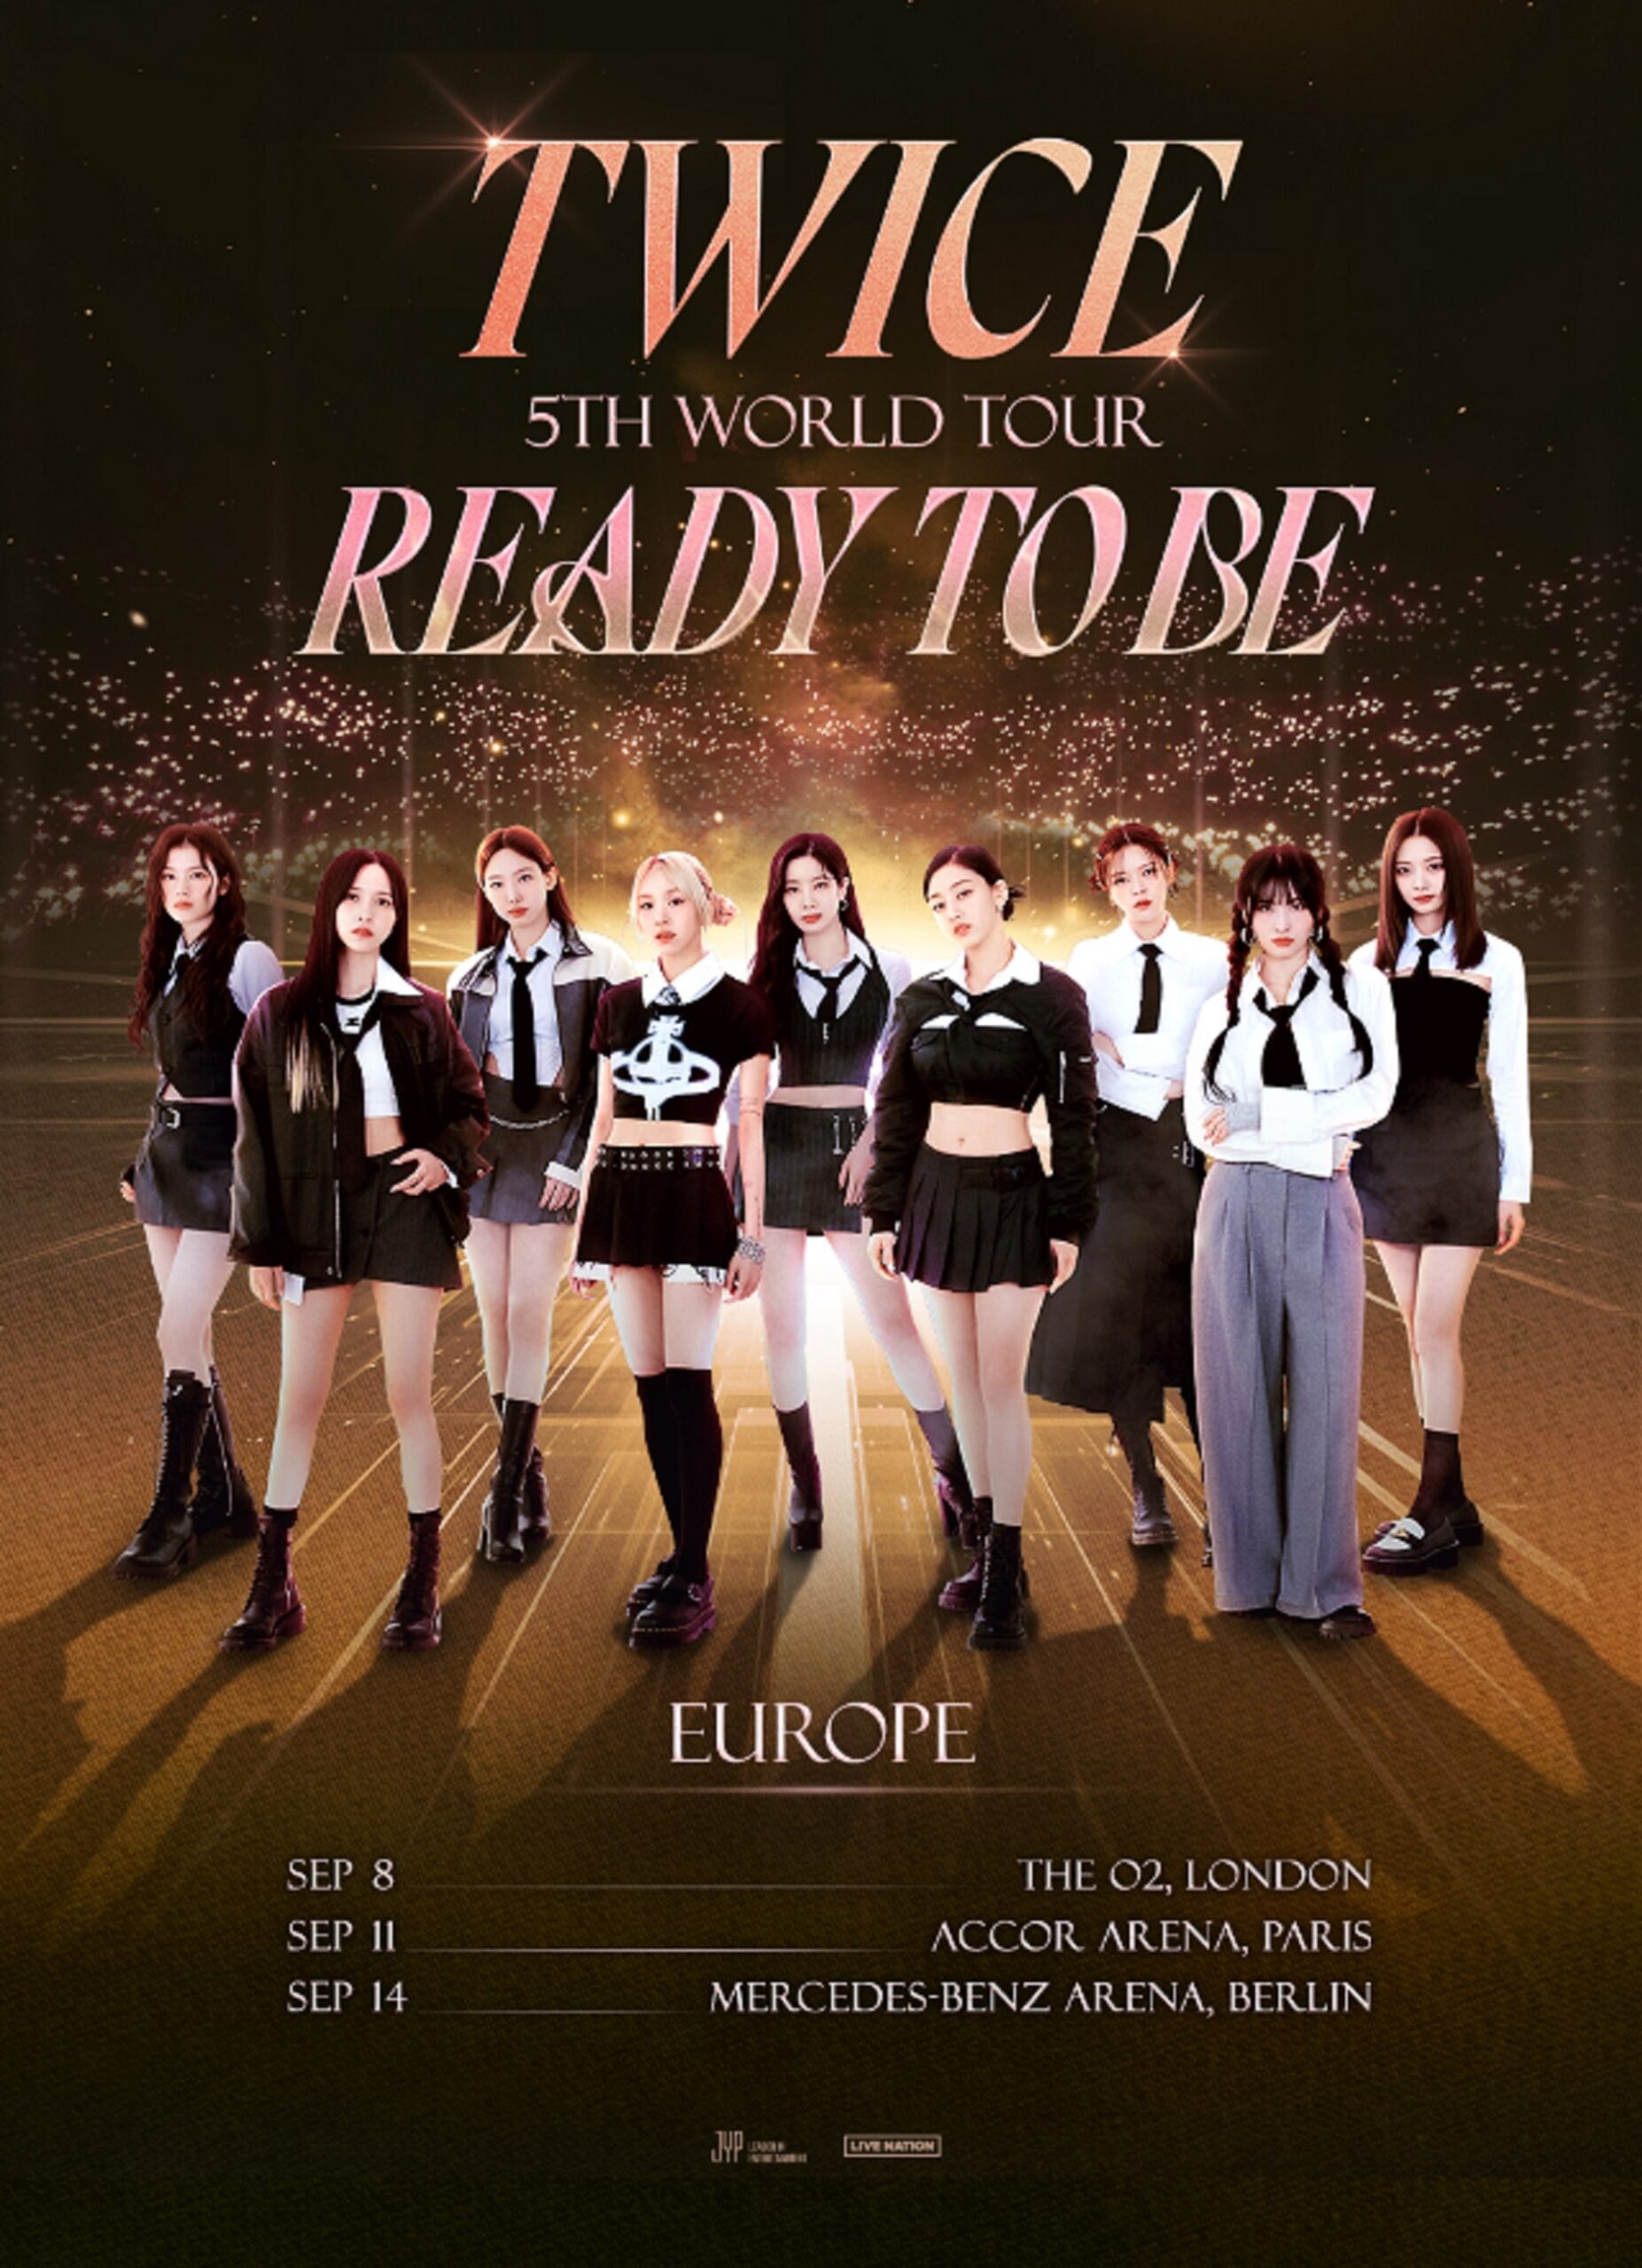 TWICE READY TO BE World Tour, tickets, dates